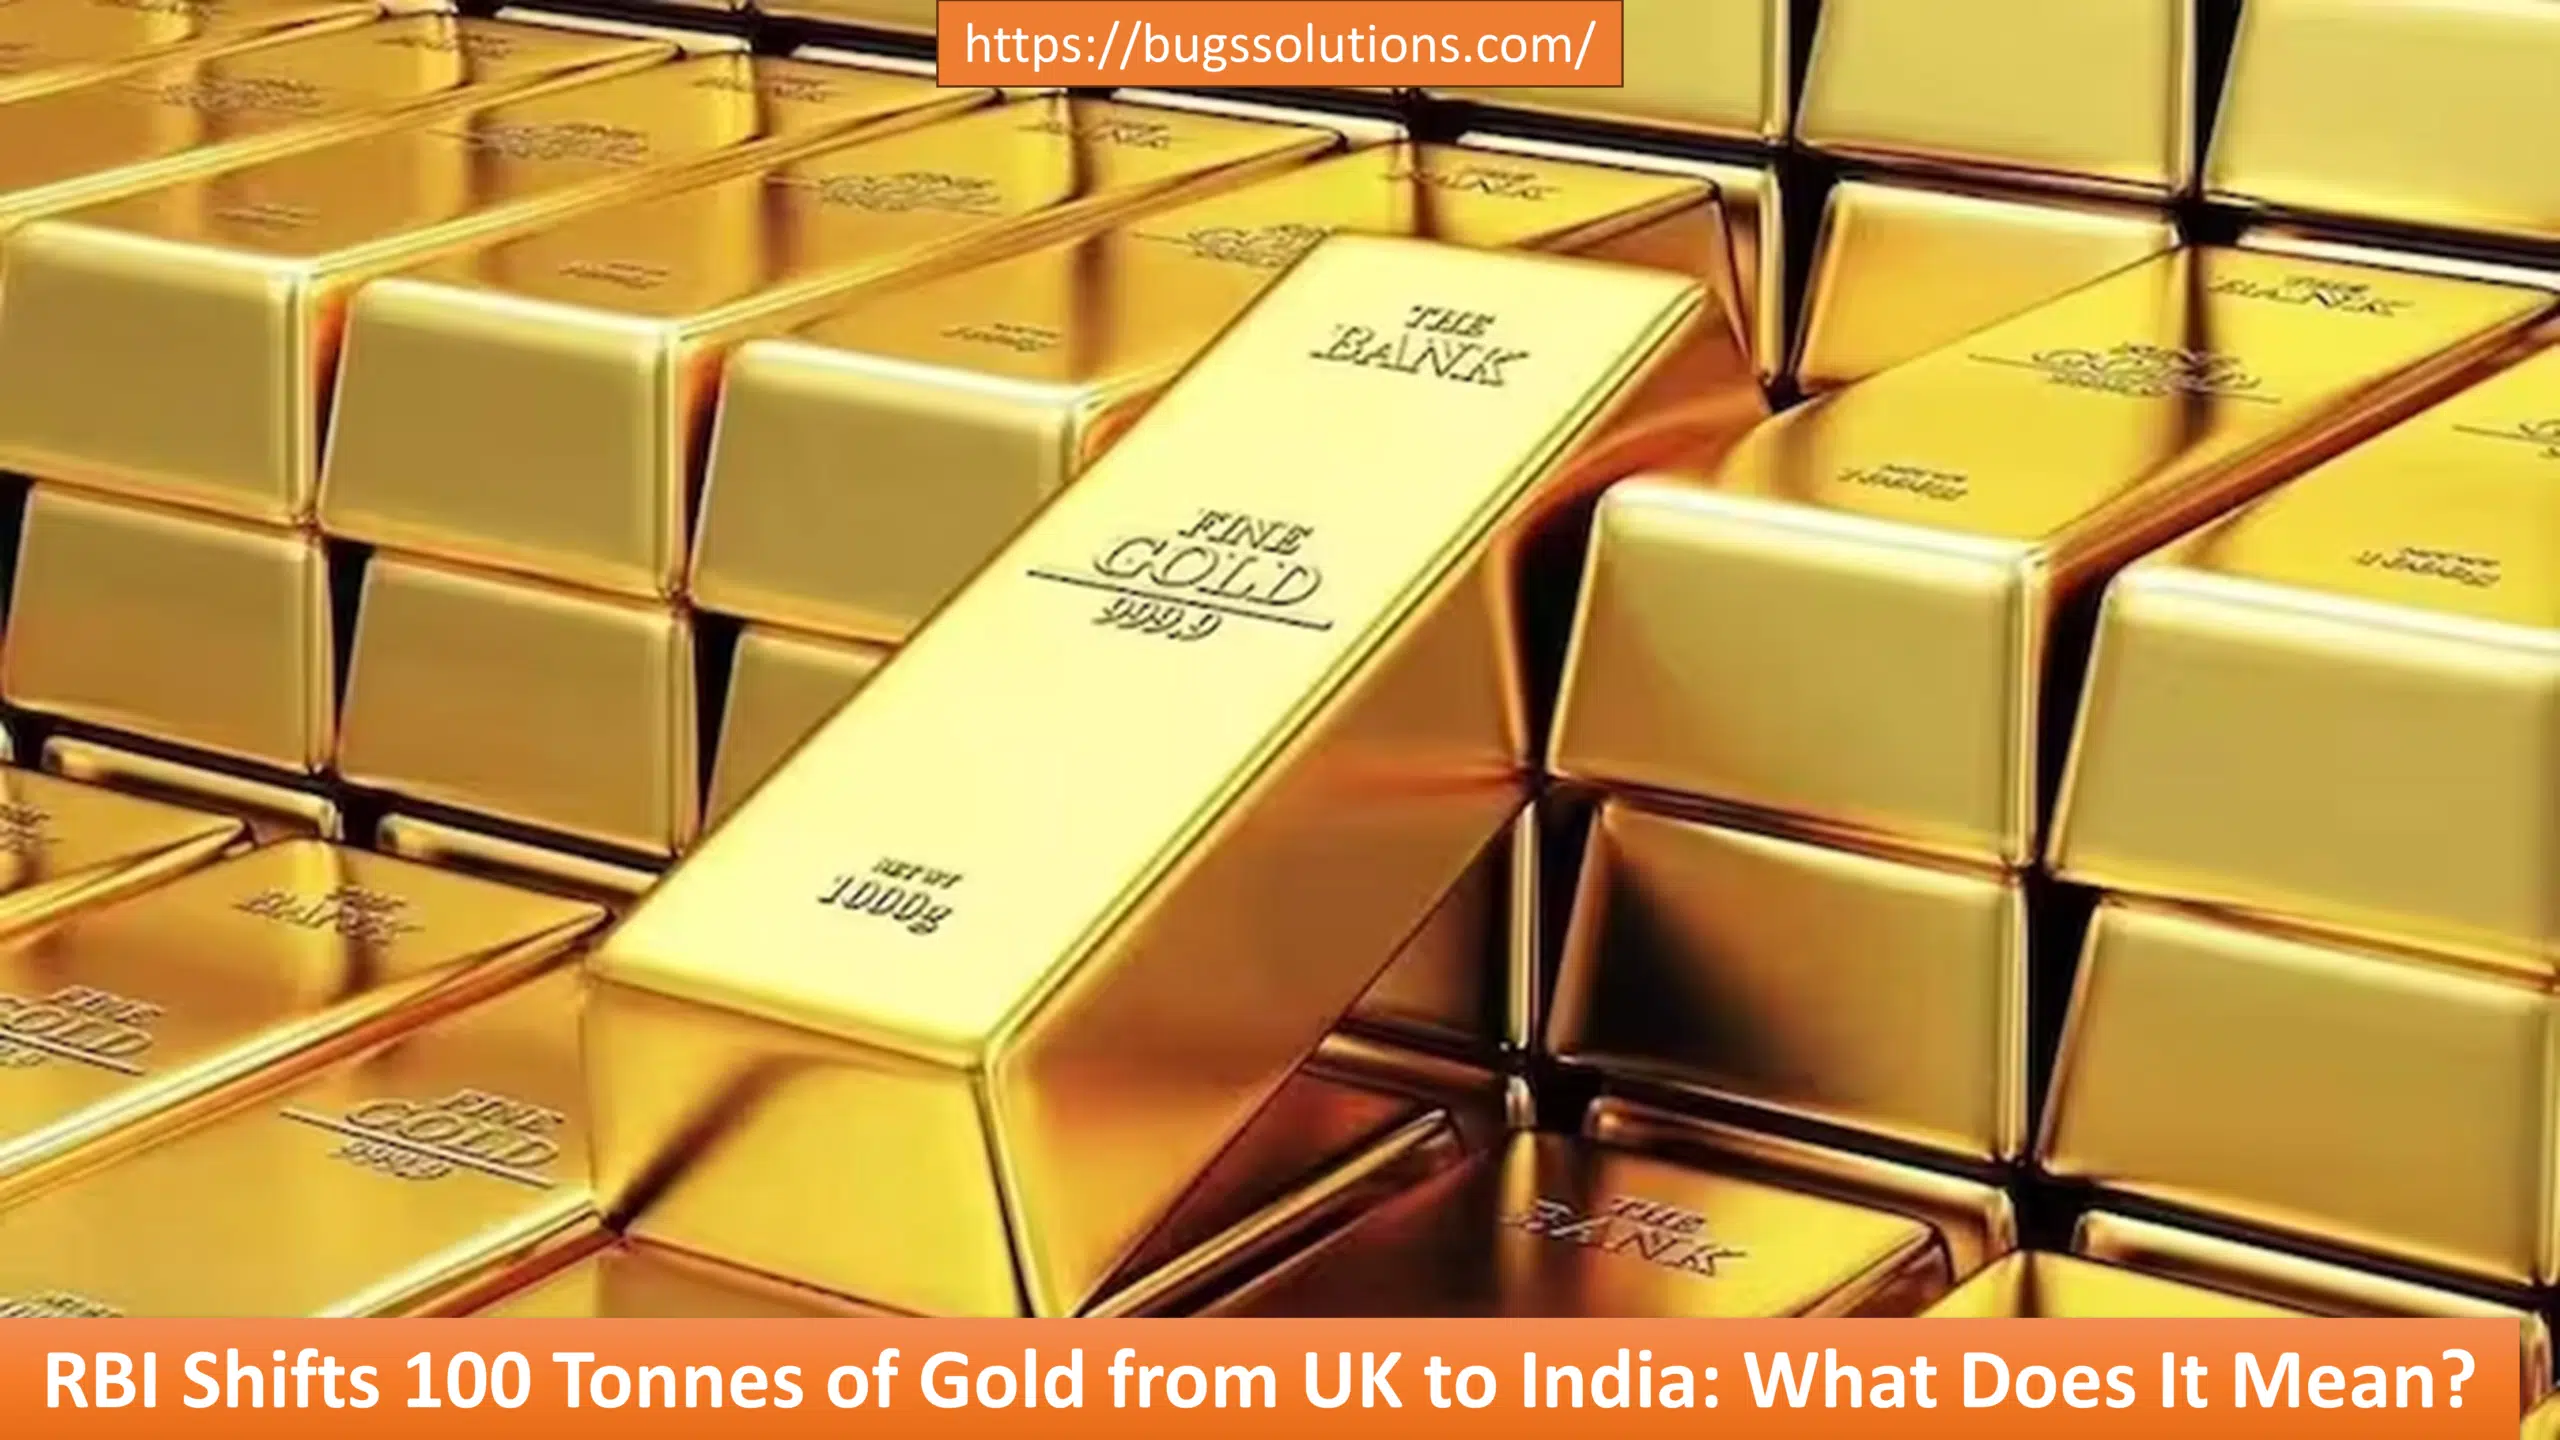 RBI Shifts 100 Tonnes of Gold from UK to India: What Does It Mean?